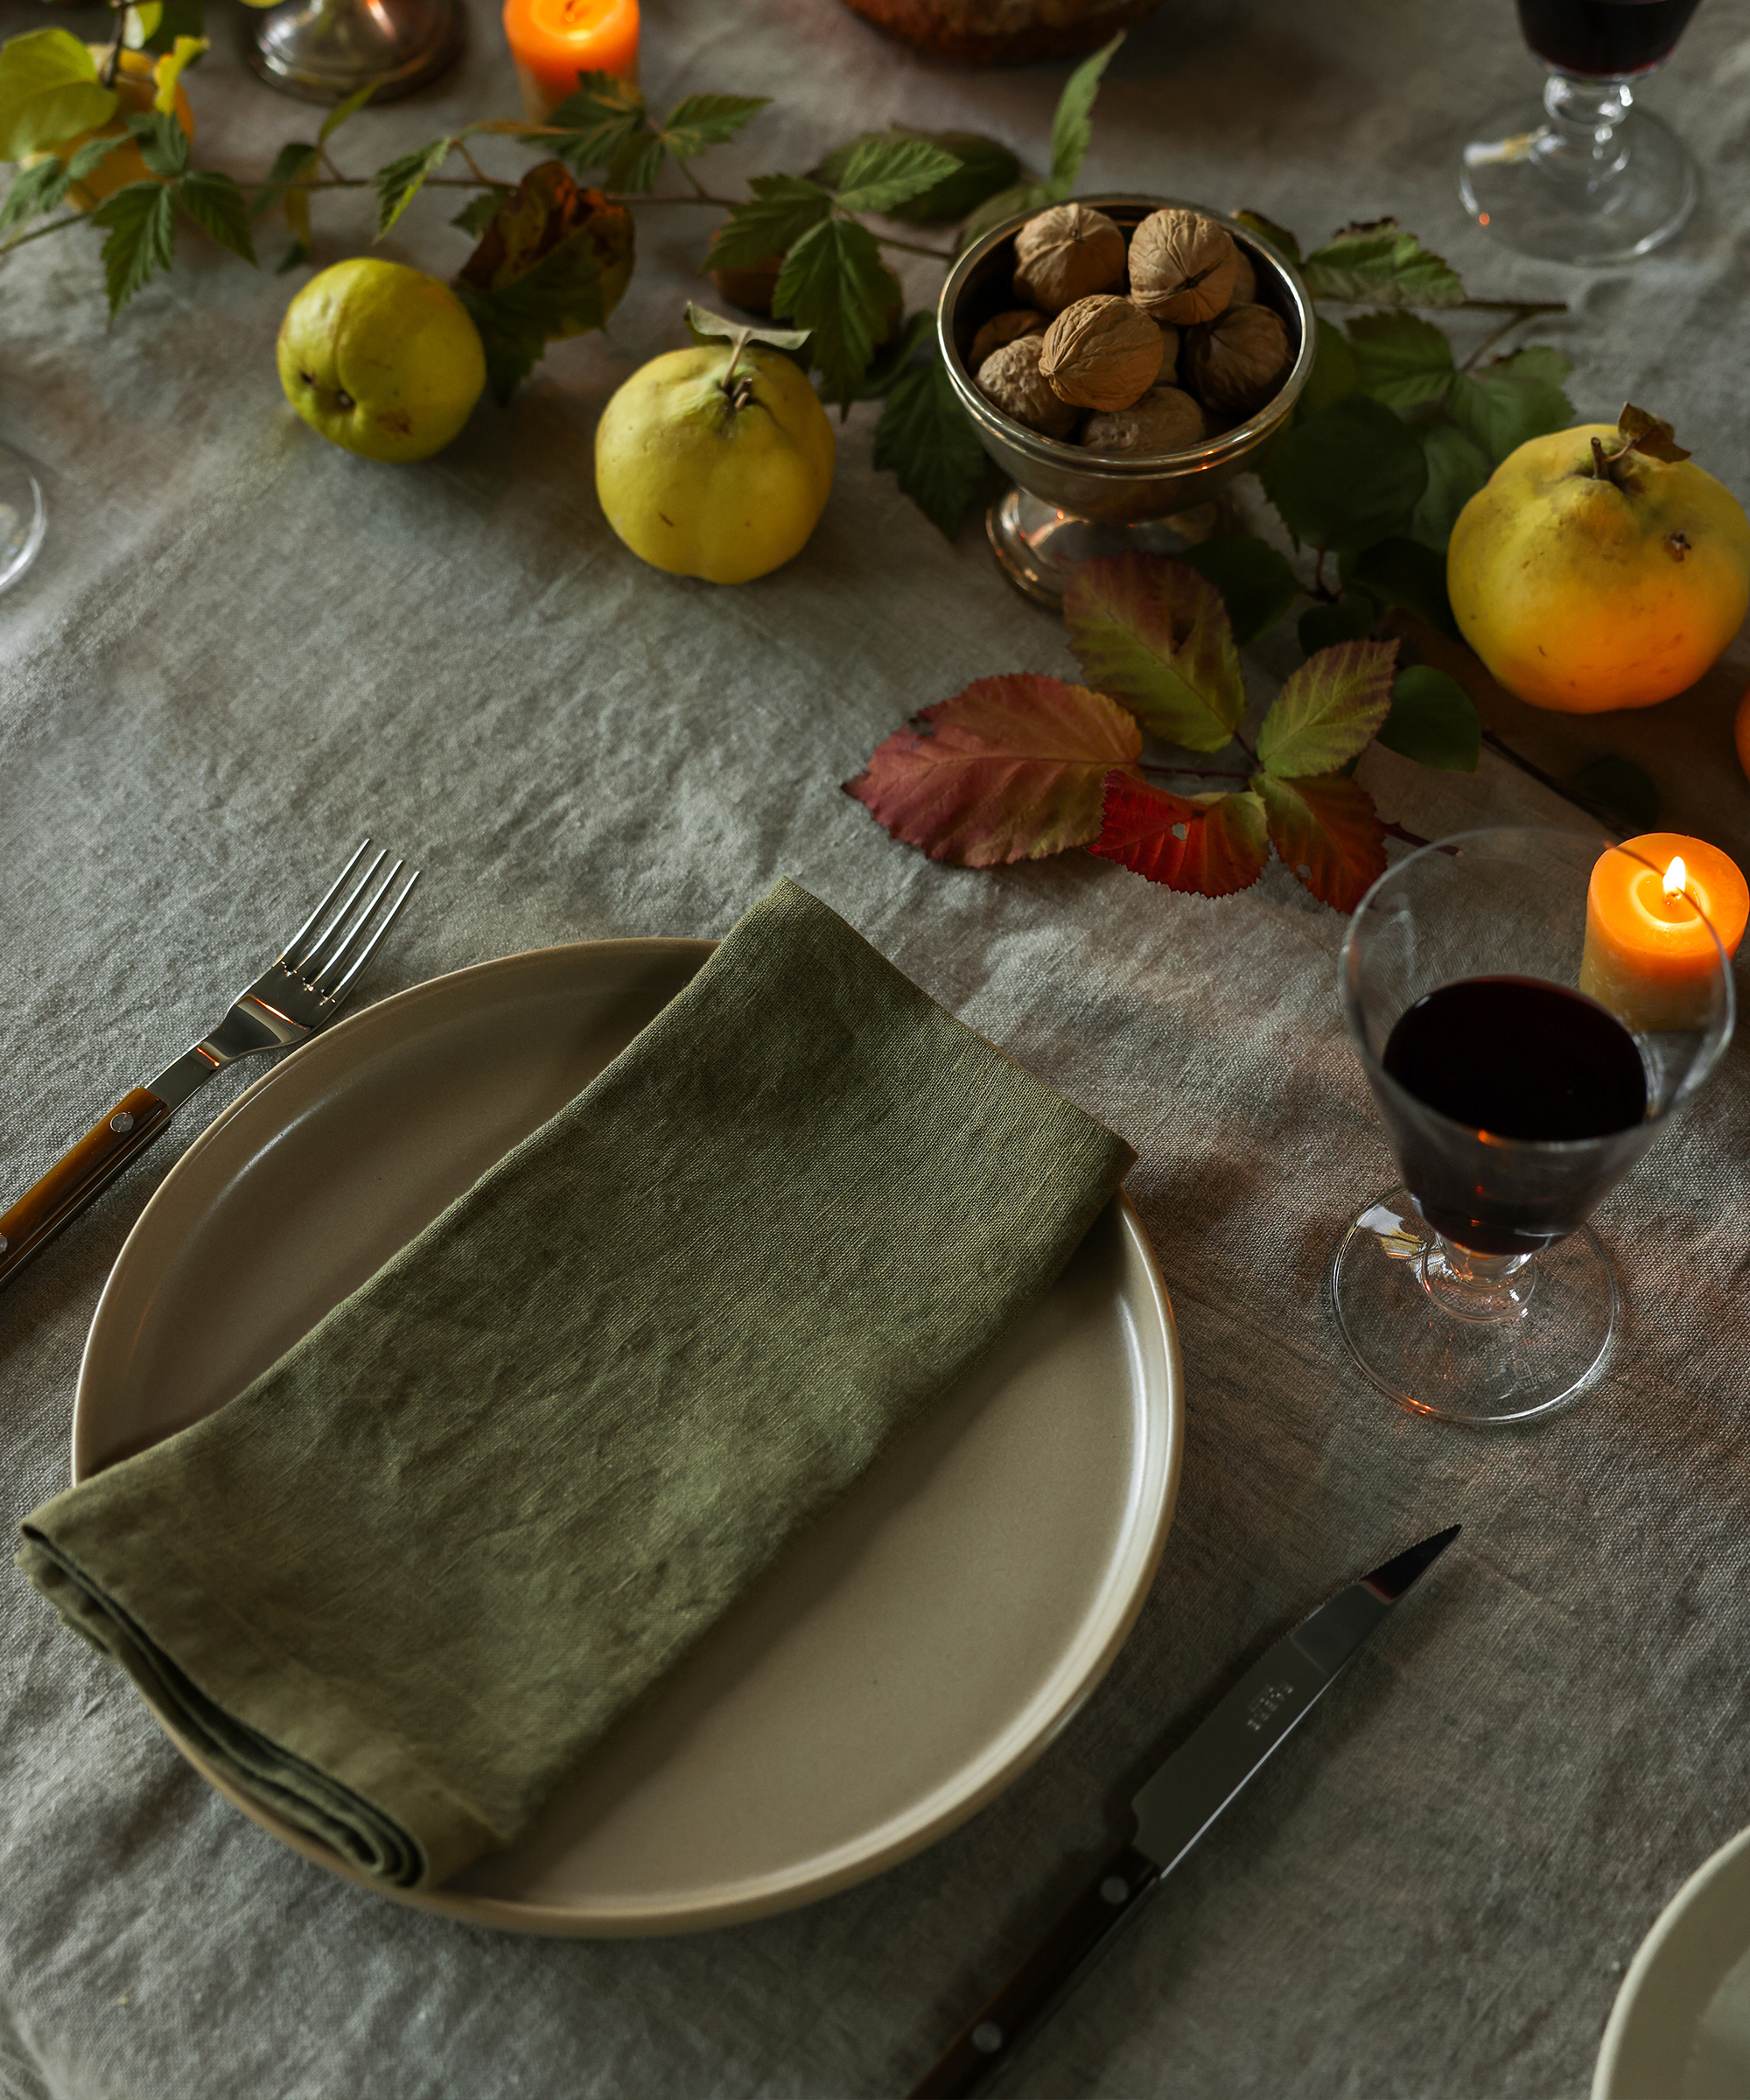 Rustic Napa Linen Kitchen Towel - Olive and Linen